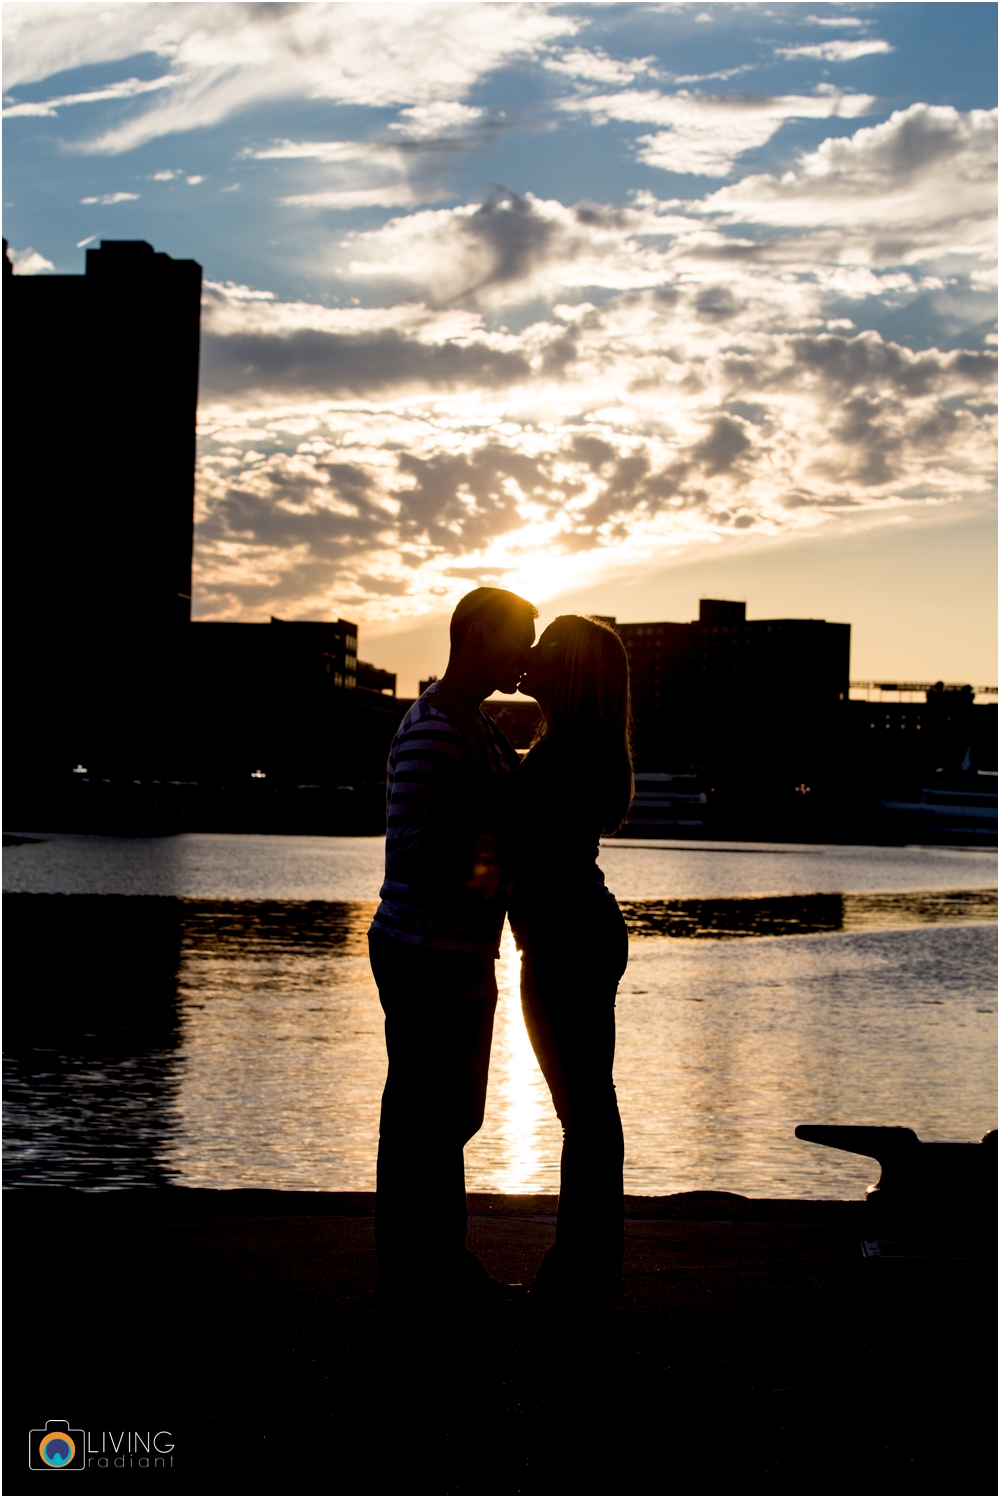 grand-historic-venue-downtown-inner-harbor-baltimore-pier-five-5-engagement-session-indoor-outdoor-living-radiant-photography-weddings-engagements_0038.jpg